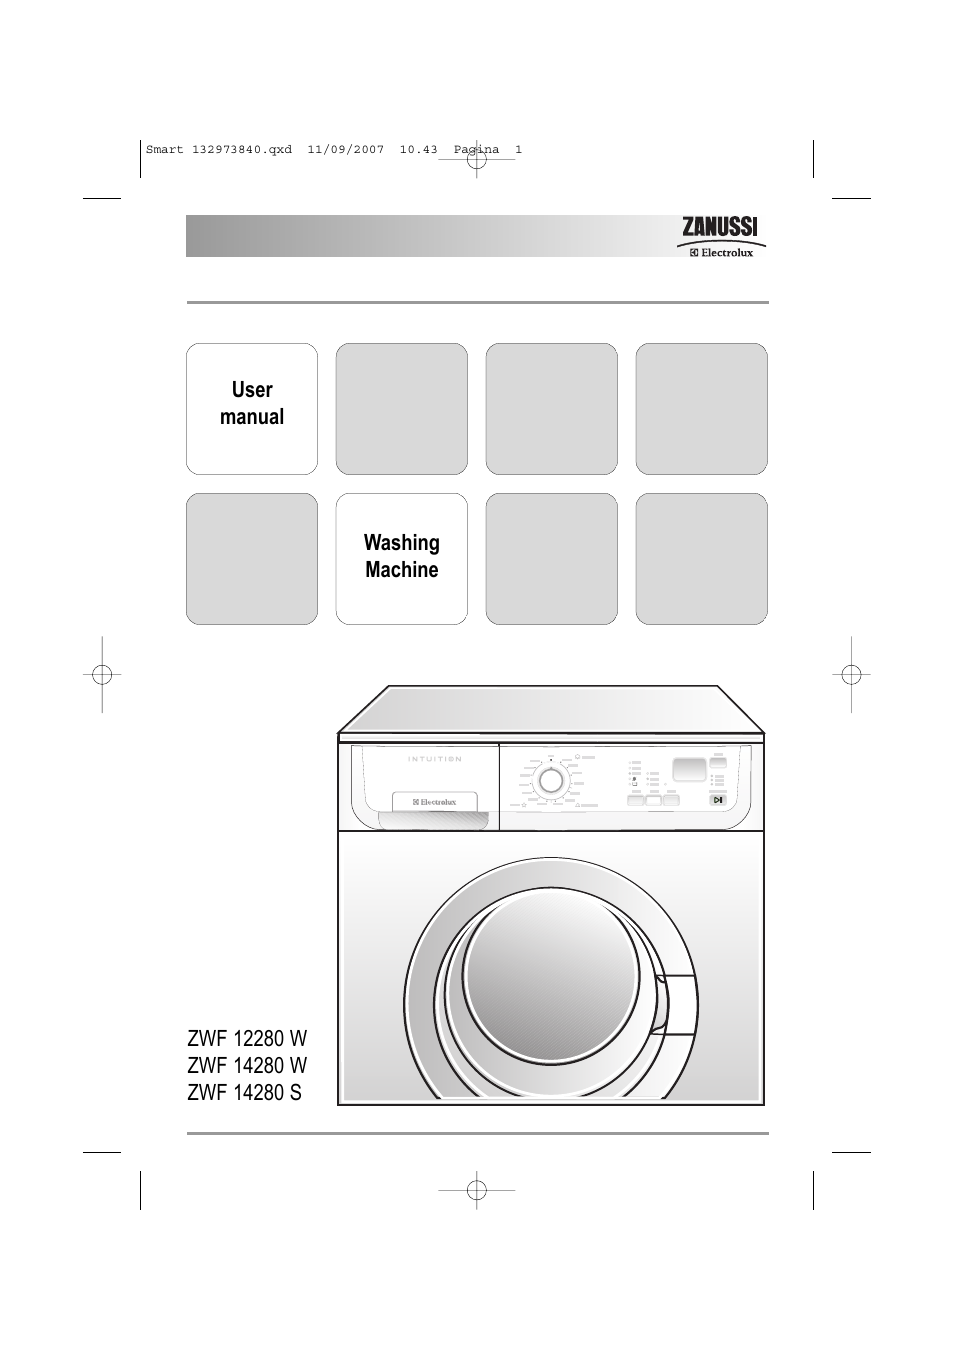 Zanussi ZWF 14280 W User Manual | 36 pages | Also for: ZWF 12280 W, ZWF  14280 S